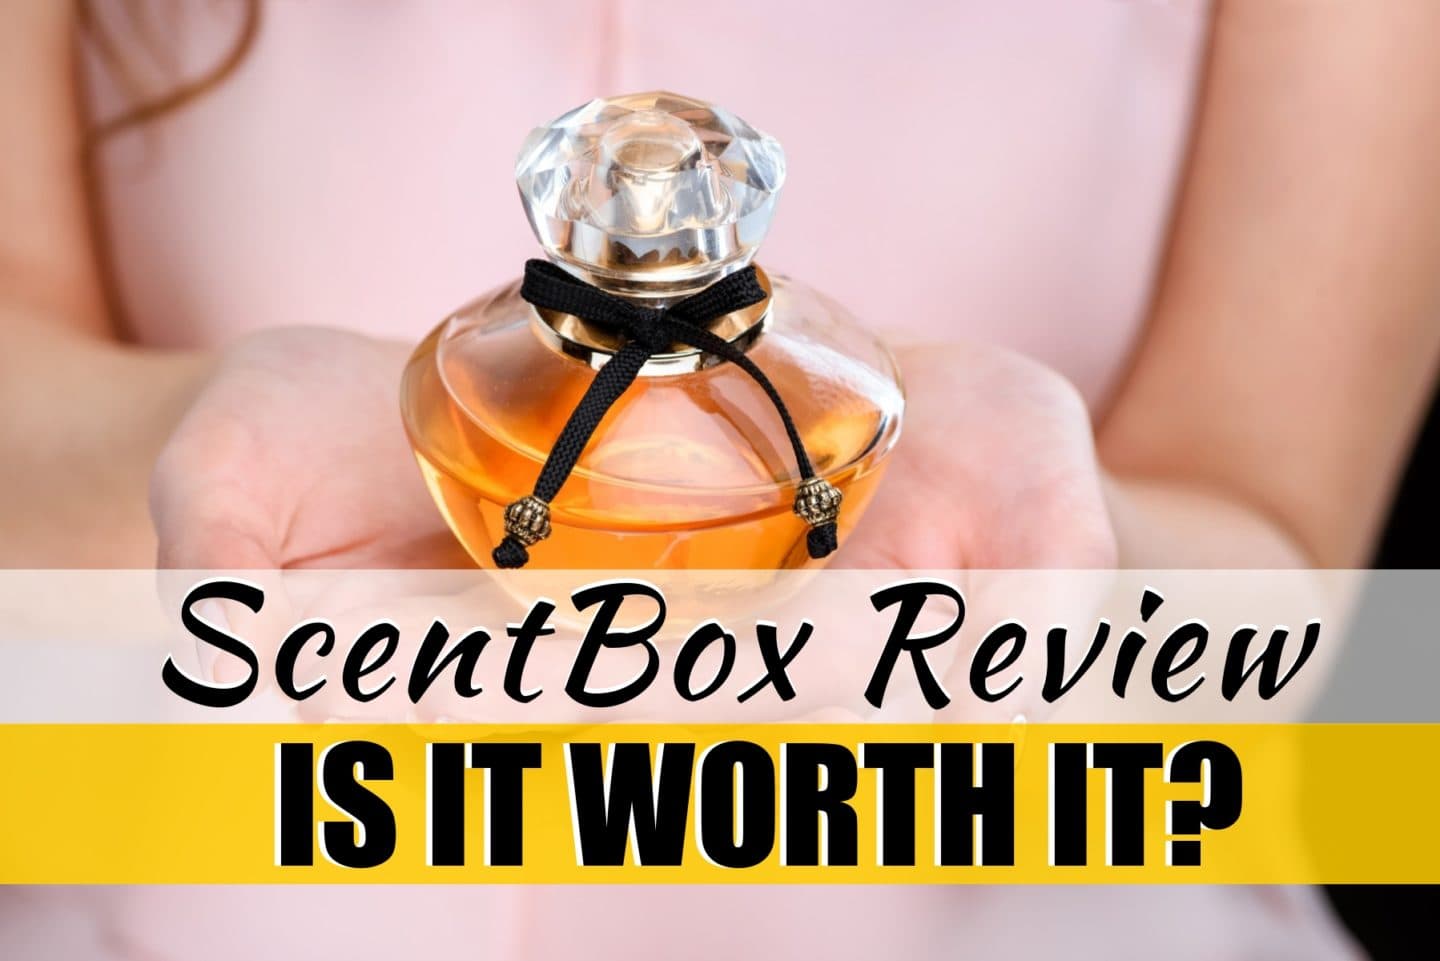 Is ScentBox worth it? I tried this perfume beauty box subscription with my own money. Here's what I think about ScentBox and the ScentBox reviews posted online.